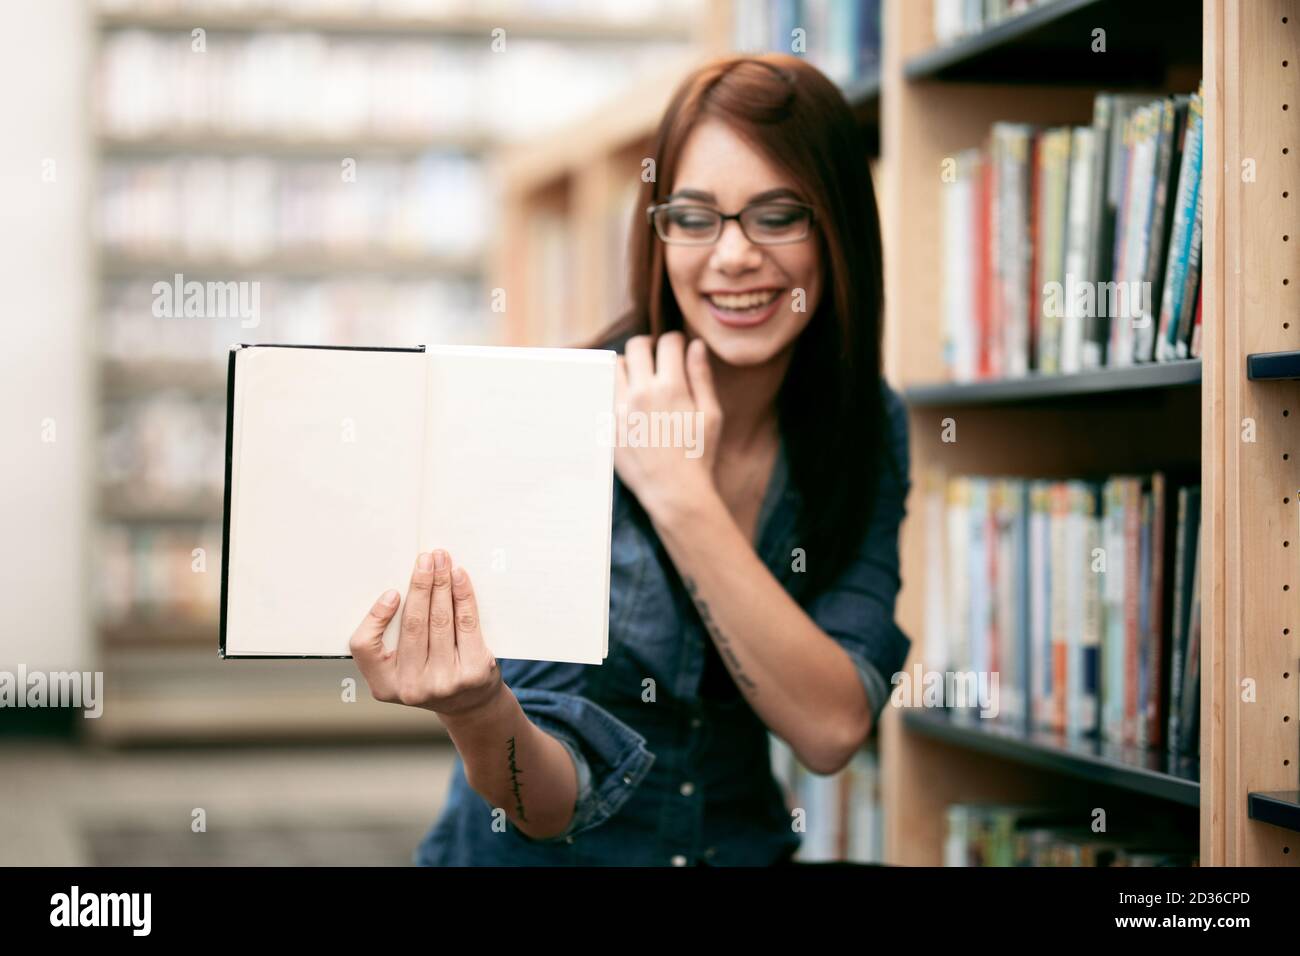 A solitary young woman holding a book with blank copy space at her local library with view of book shelves and bookcases. Stock Photo